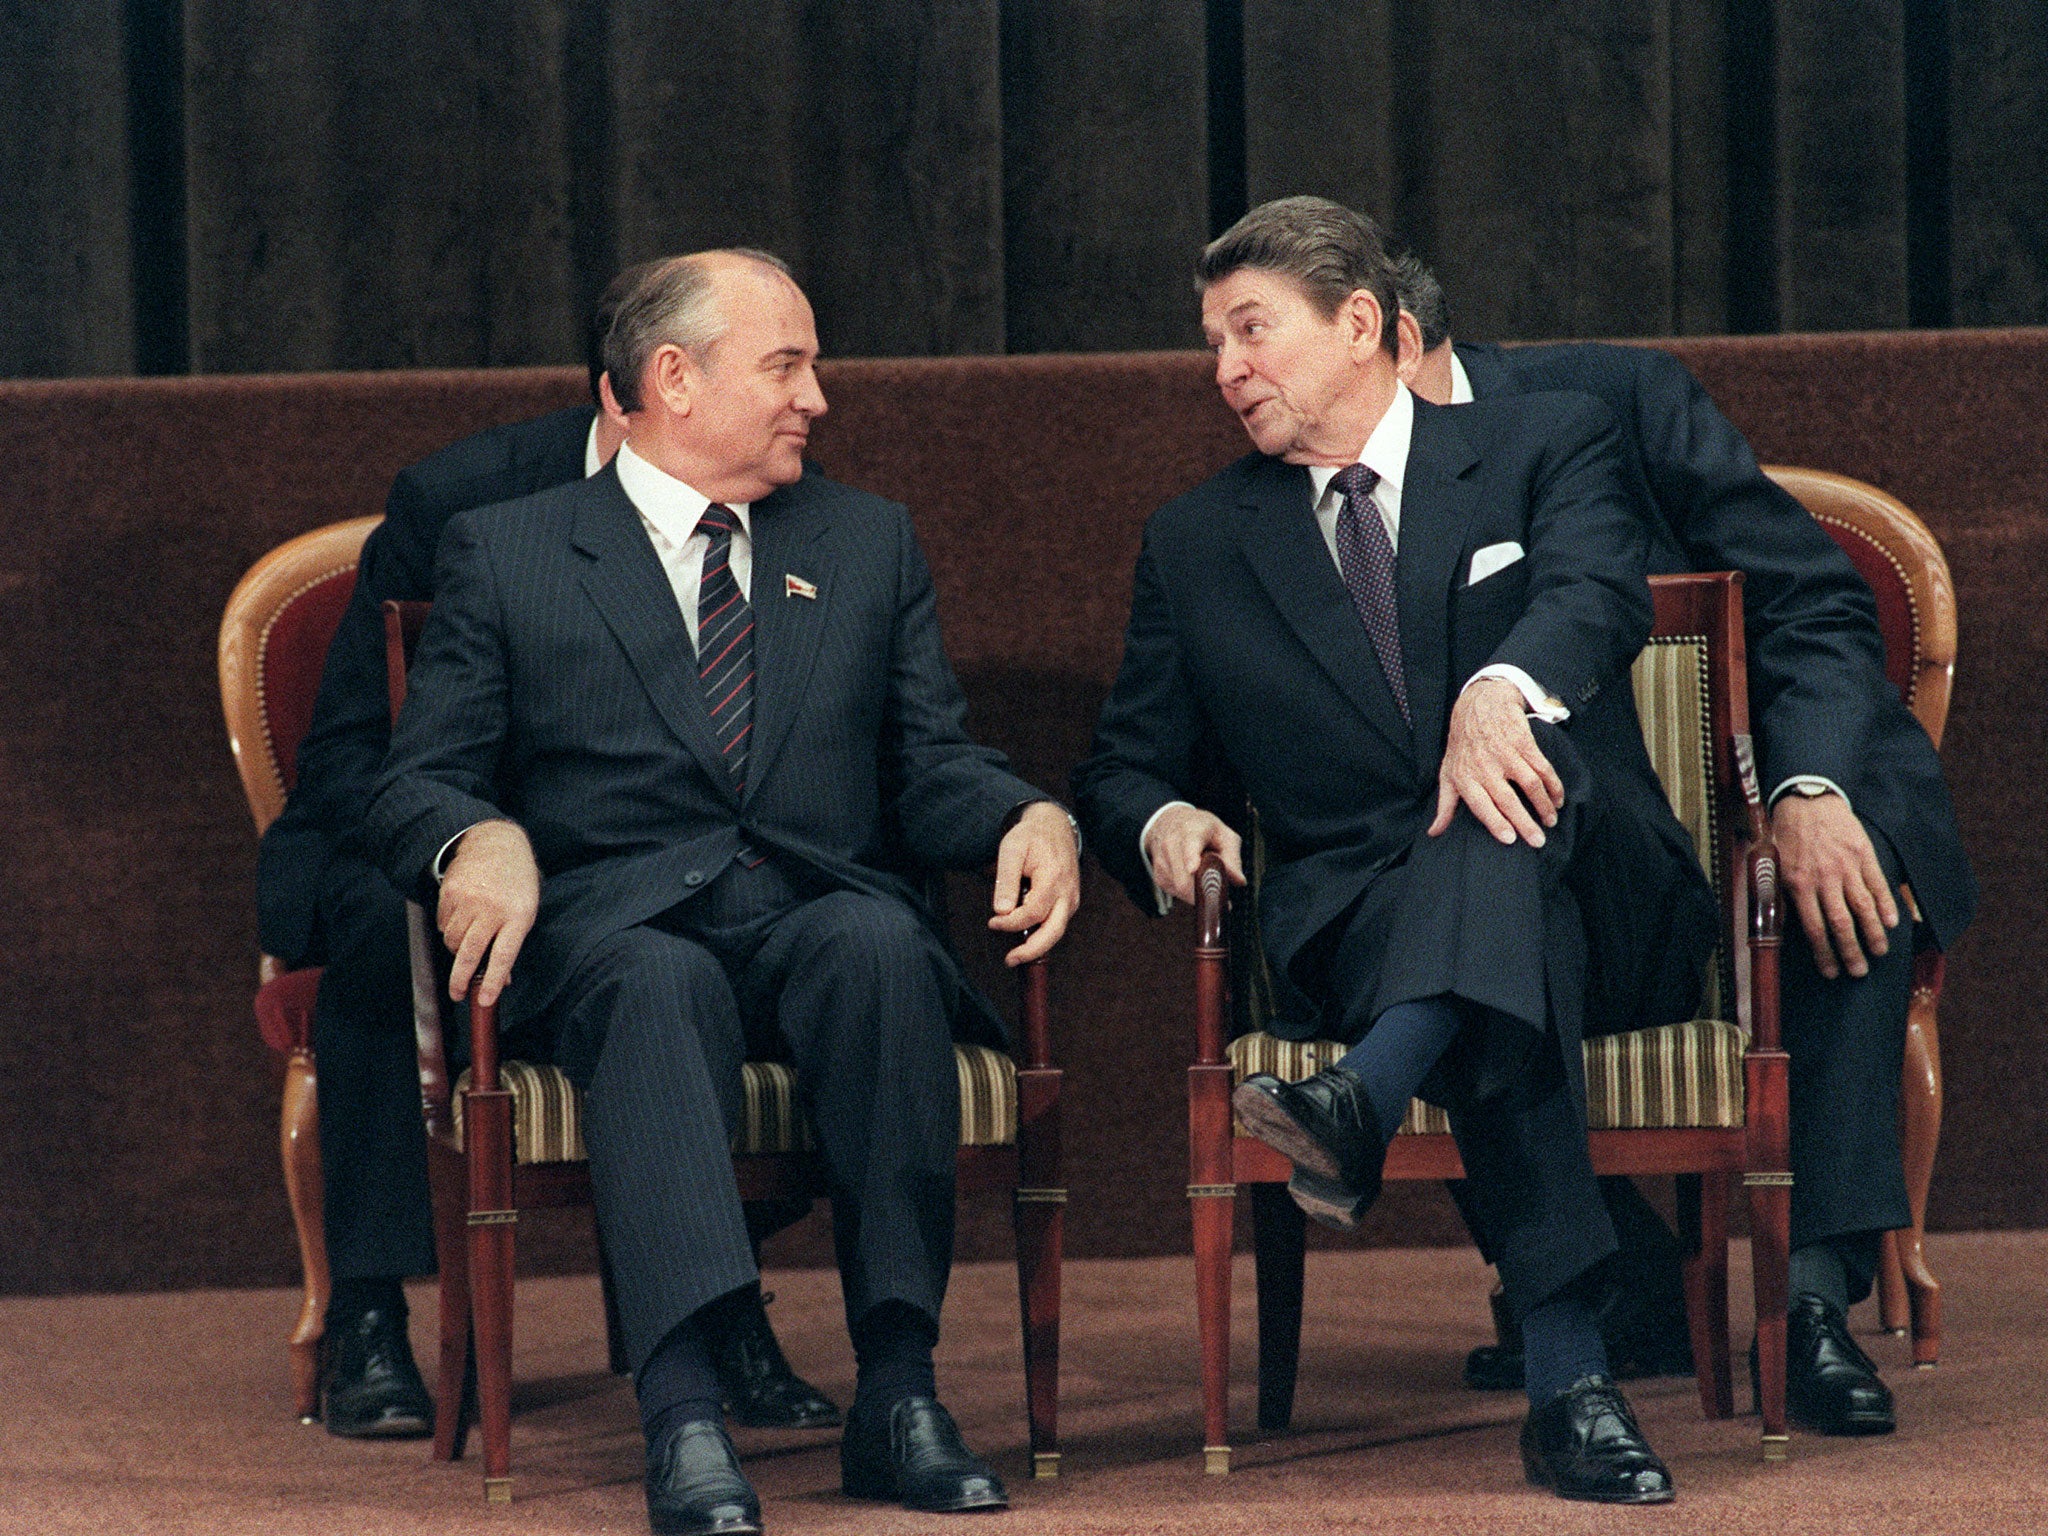 Gorbachev, more than Reagan or any other Western leader, removed the ever-present danger of a global nuclear war